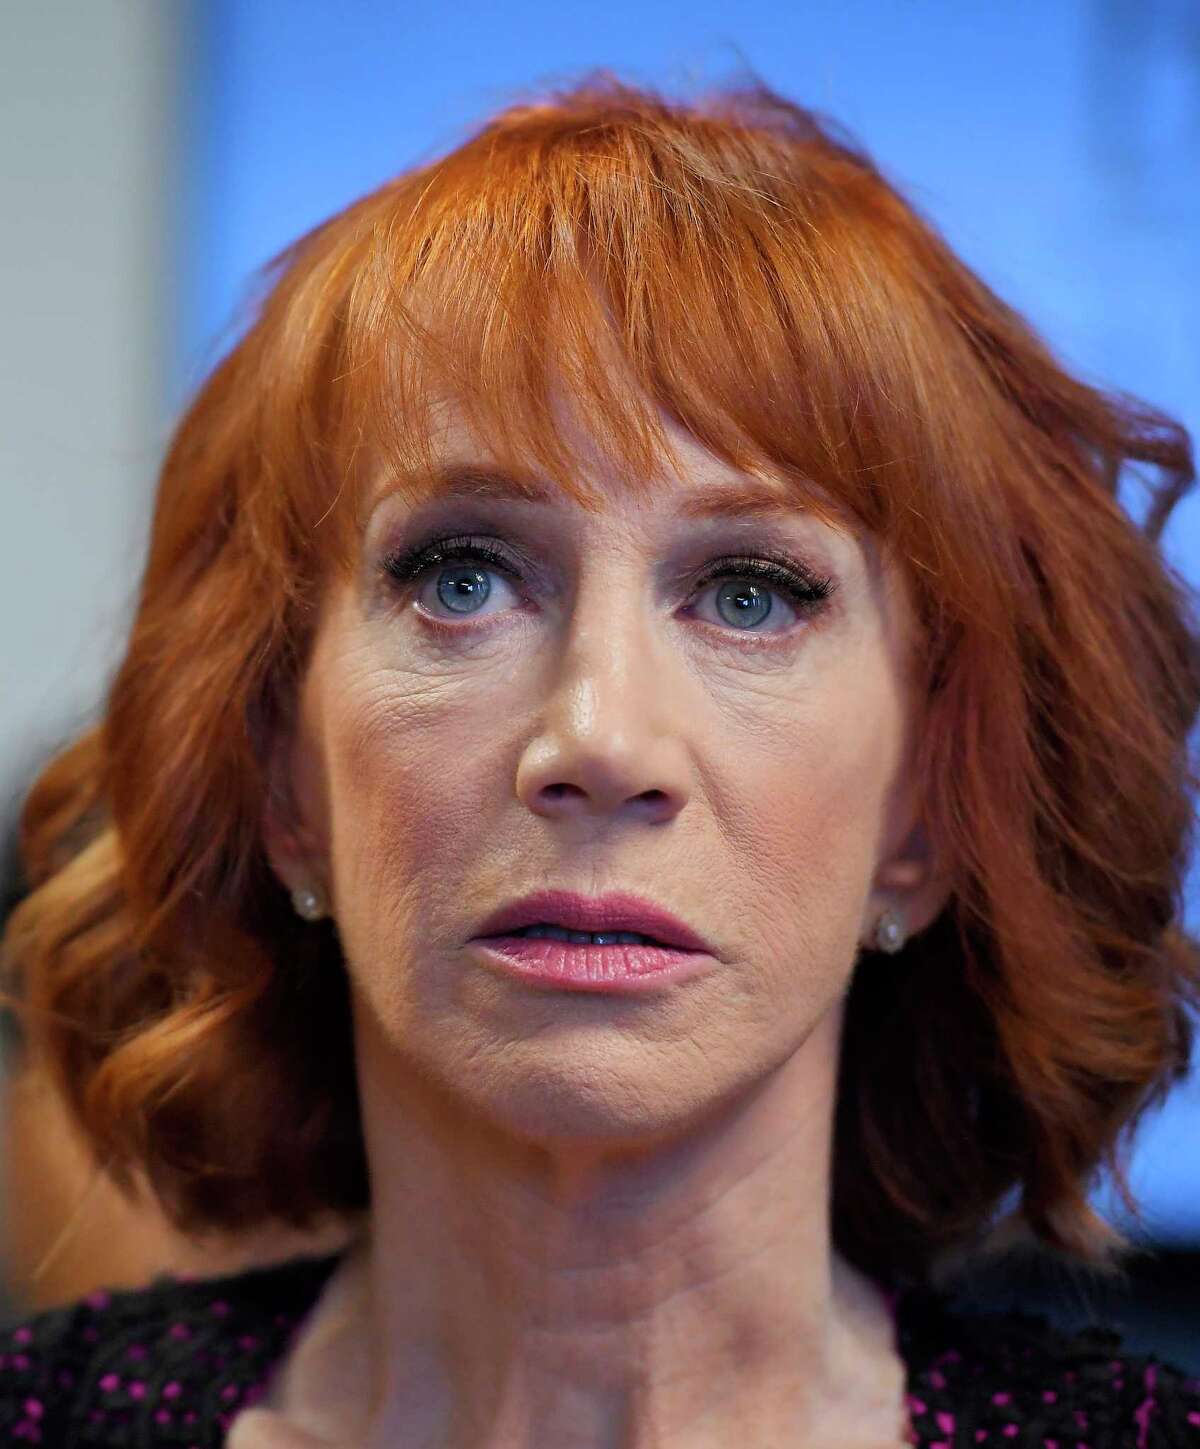 Comedian Kathy Griffin speaks during a news conference, Friday, June 2, 2017, in Los Angeles to discuss the backlash since Griffin released a photo and video of her displaying a likeness of President Donald Trump's severed head. (AP Photo/Mark J. Terrill)